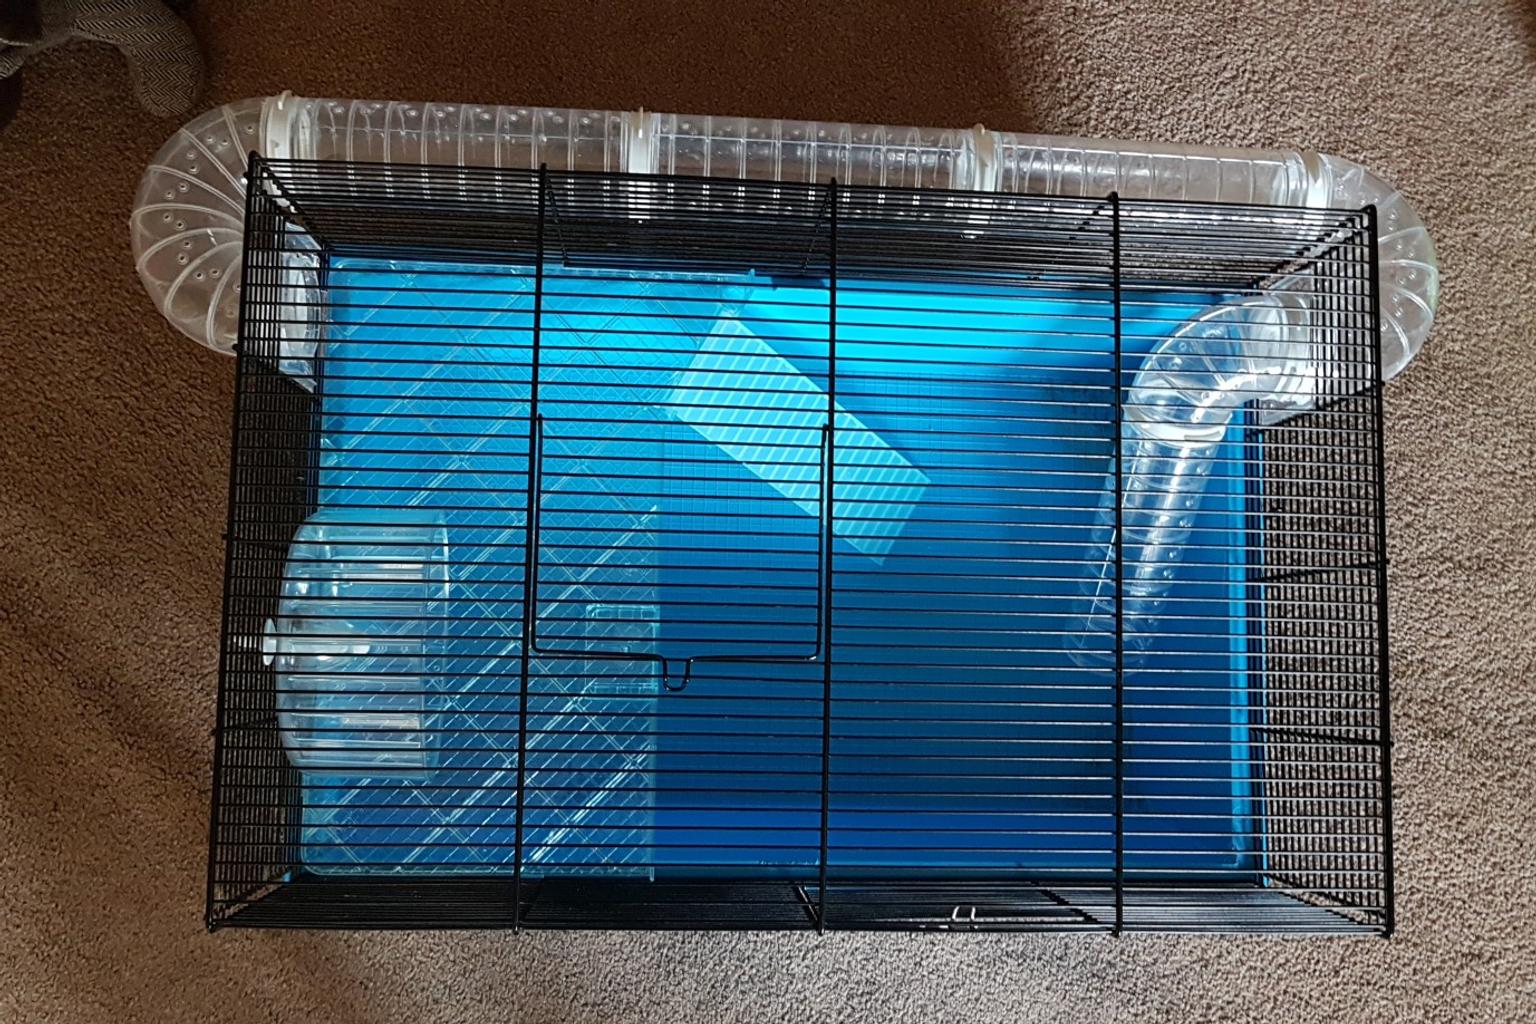 pets at home hamster tubes